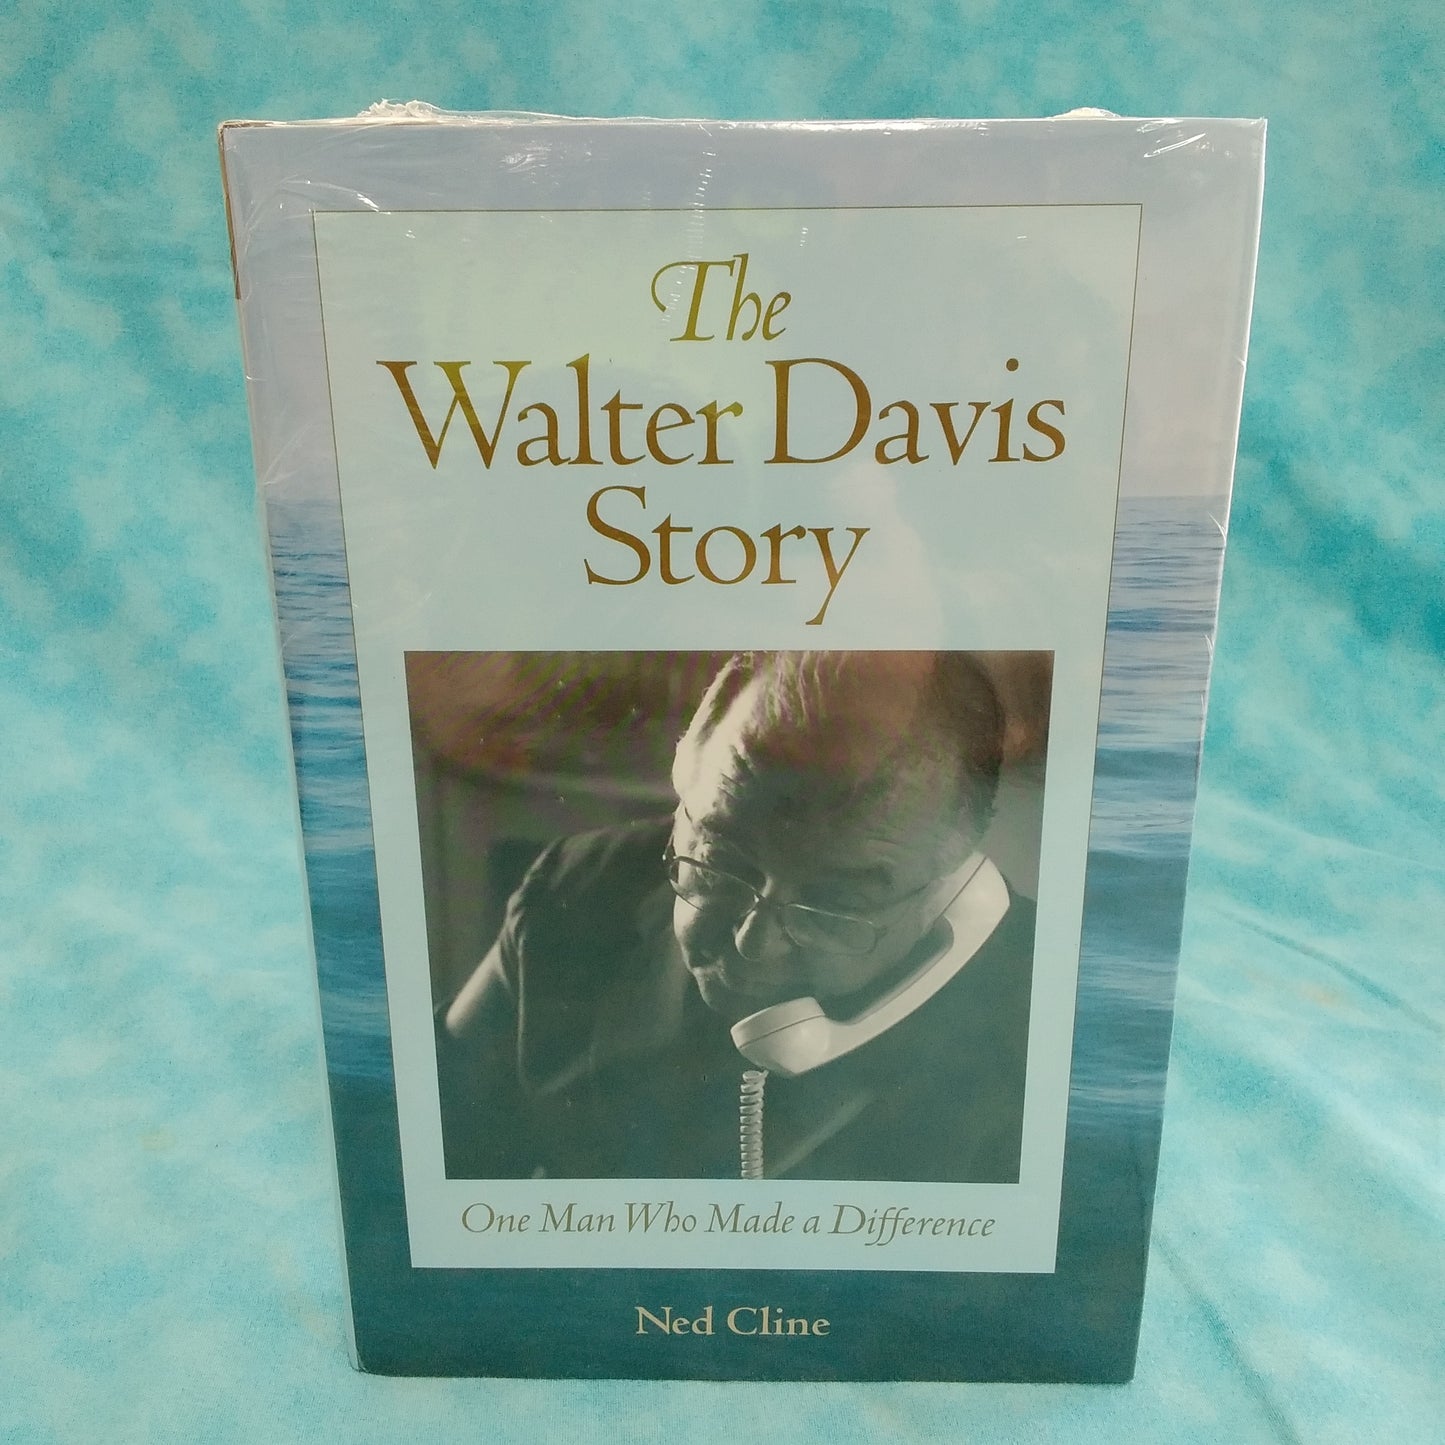 NEW - The Walter Davis Story: One Man Who Made a Difference by Cline, Ned